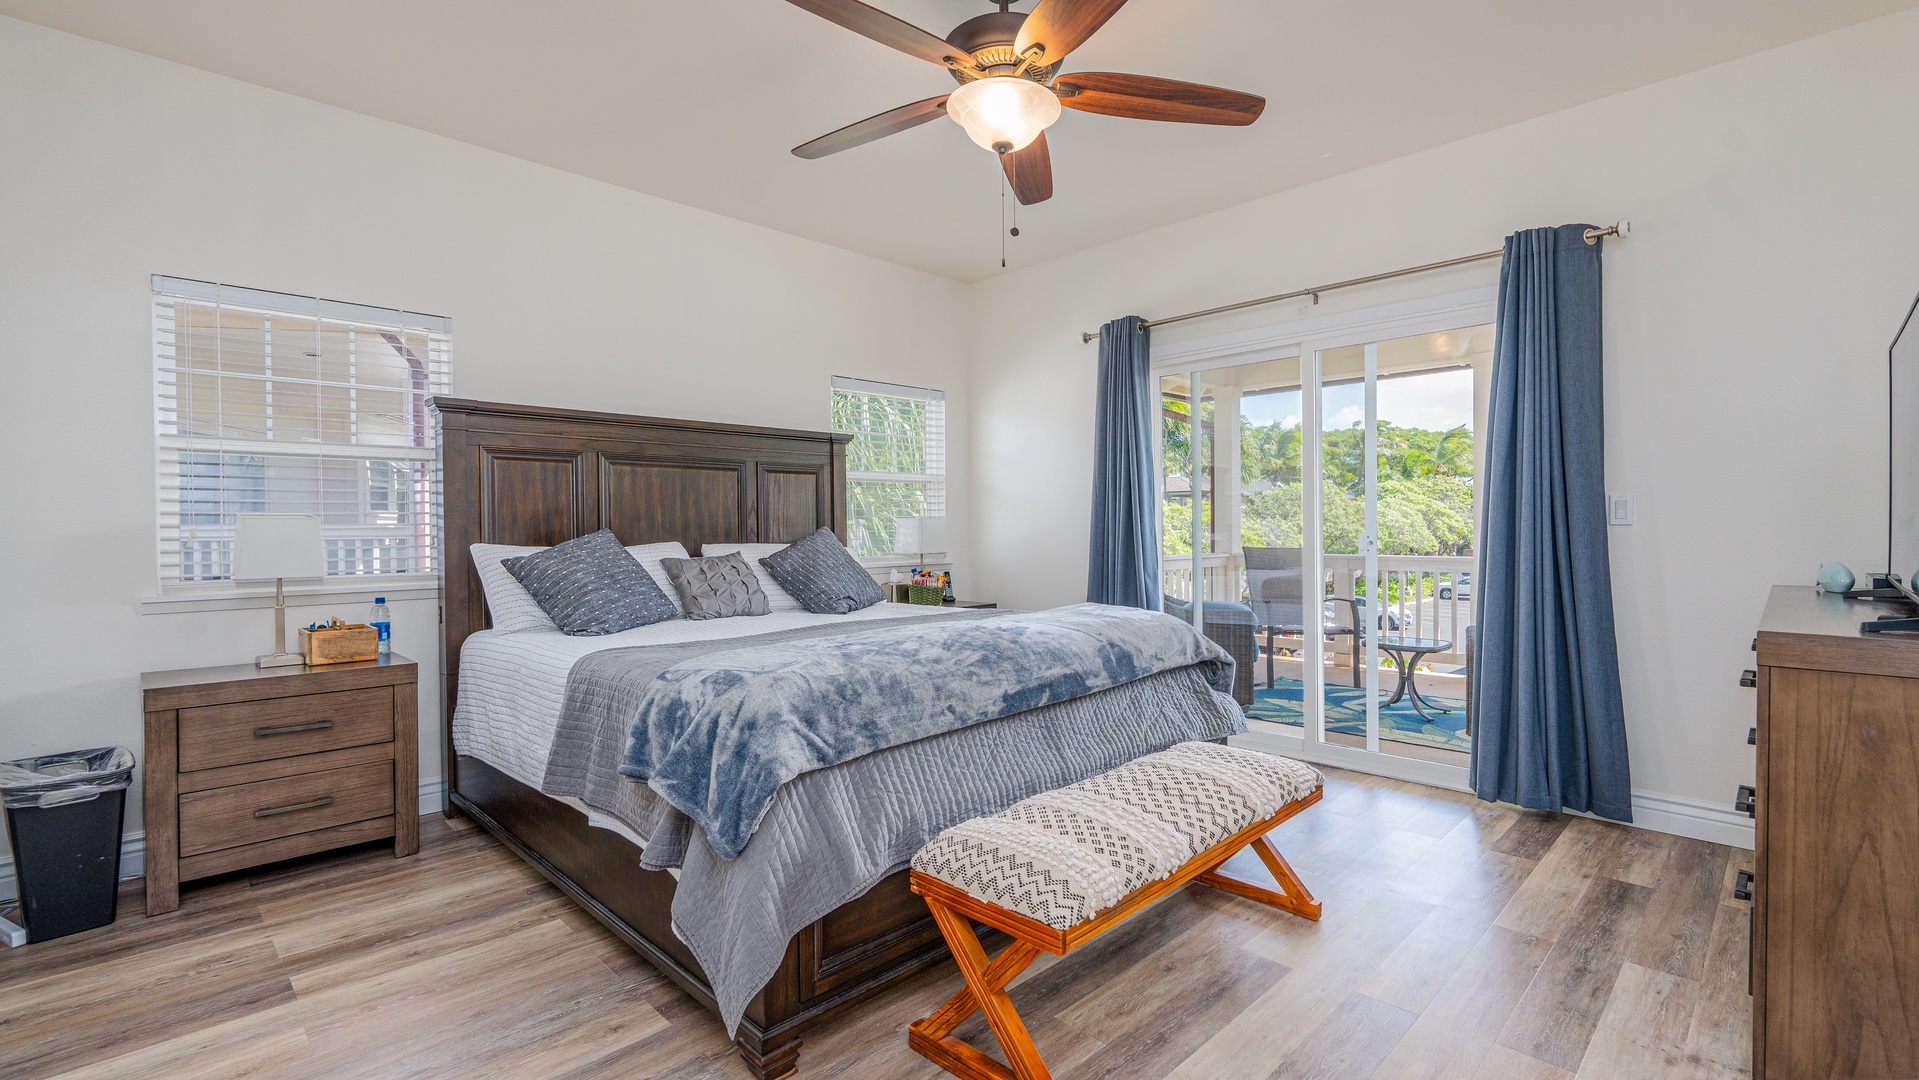 Kapolei Vacation Rentals, Coconut Plantation 1078-1 - The king bed with luxurious linens.